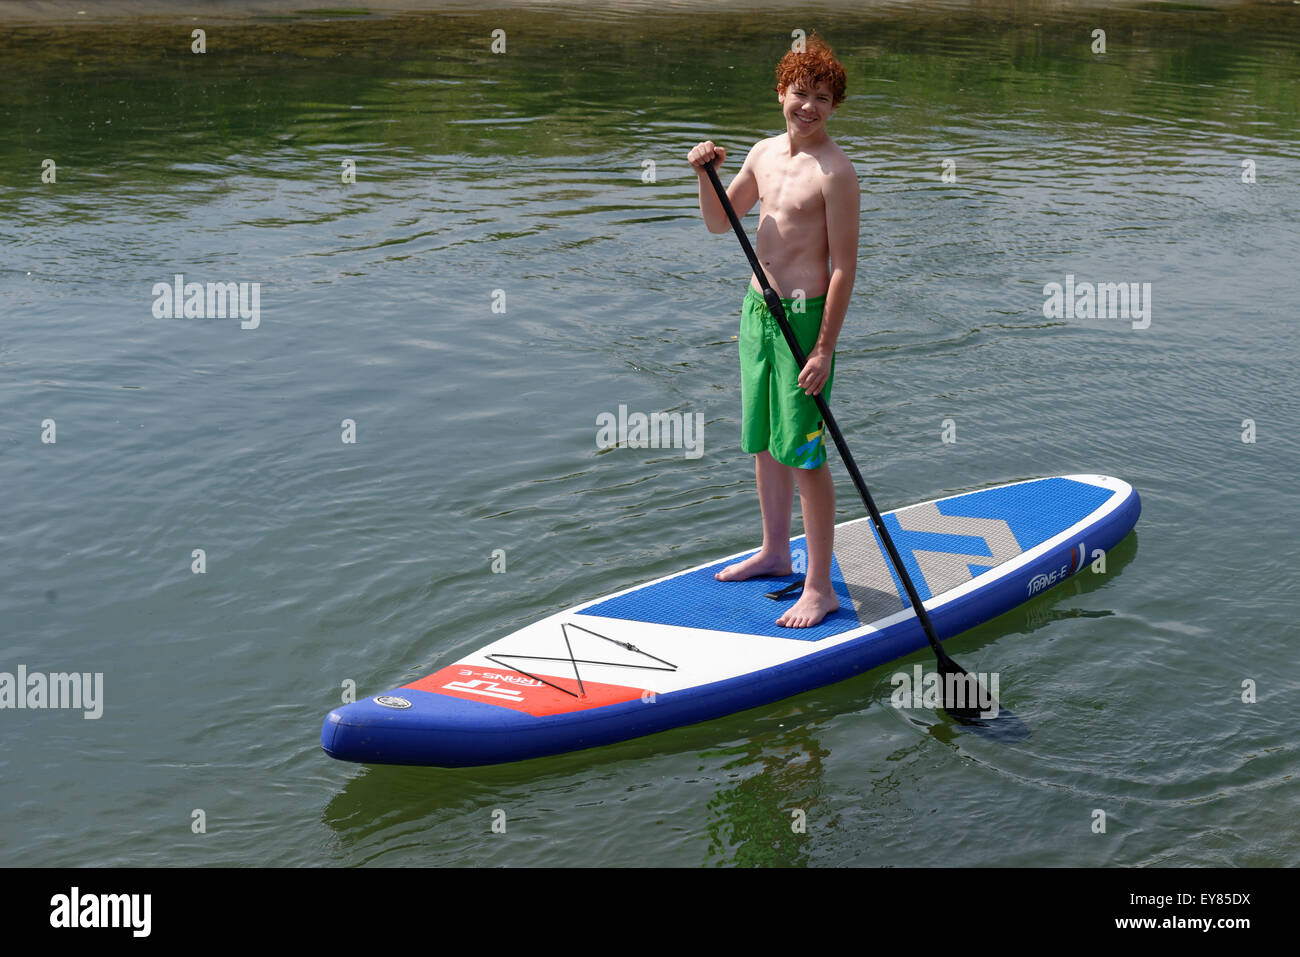 Boy on a stand up board, stand-up paddling, on the Loisach canal, Upper Bavaria, Bavaria, Germany Stock Photo